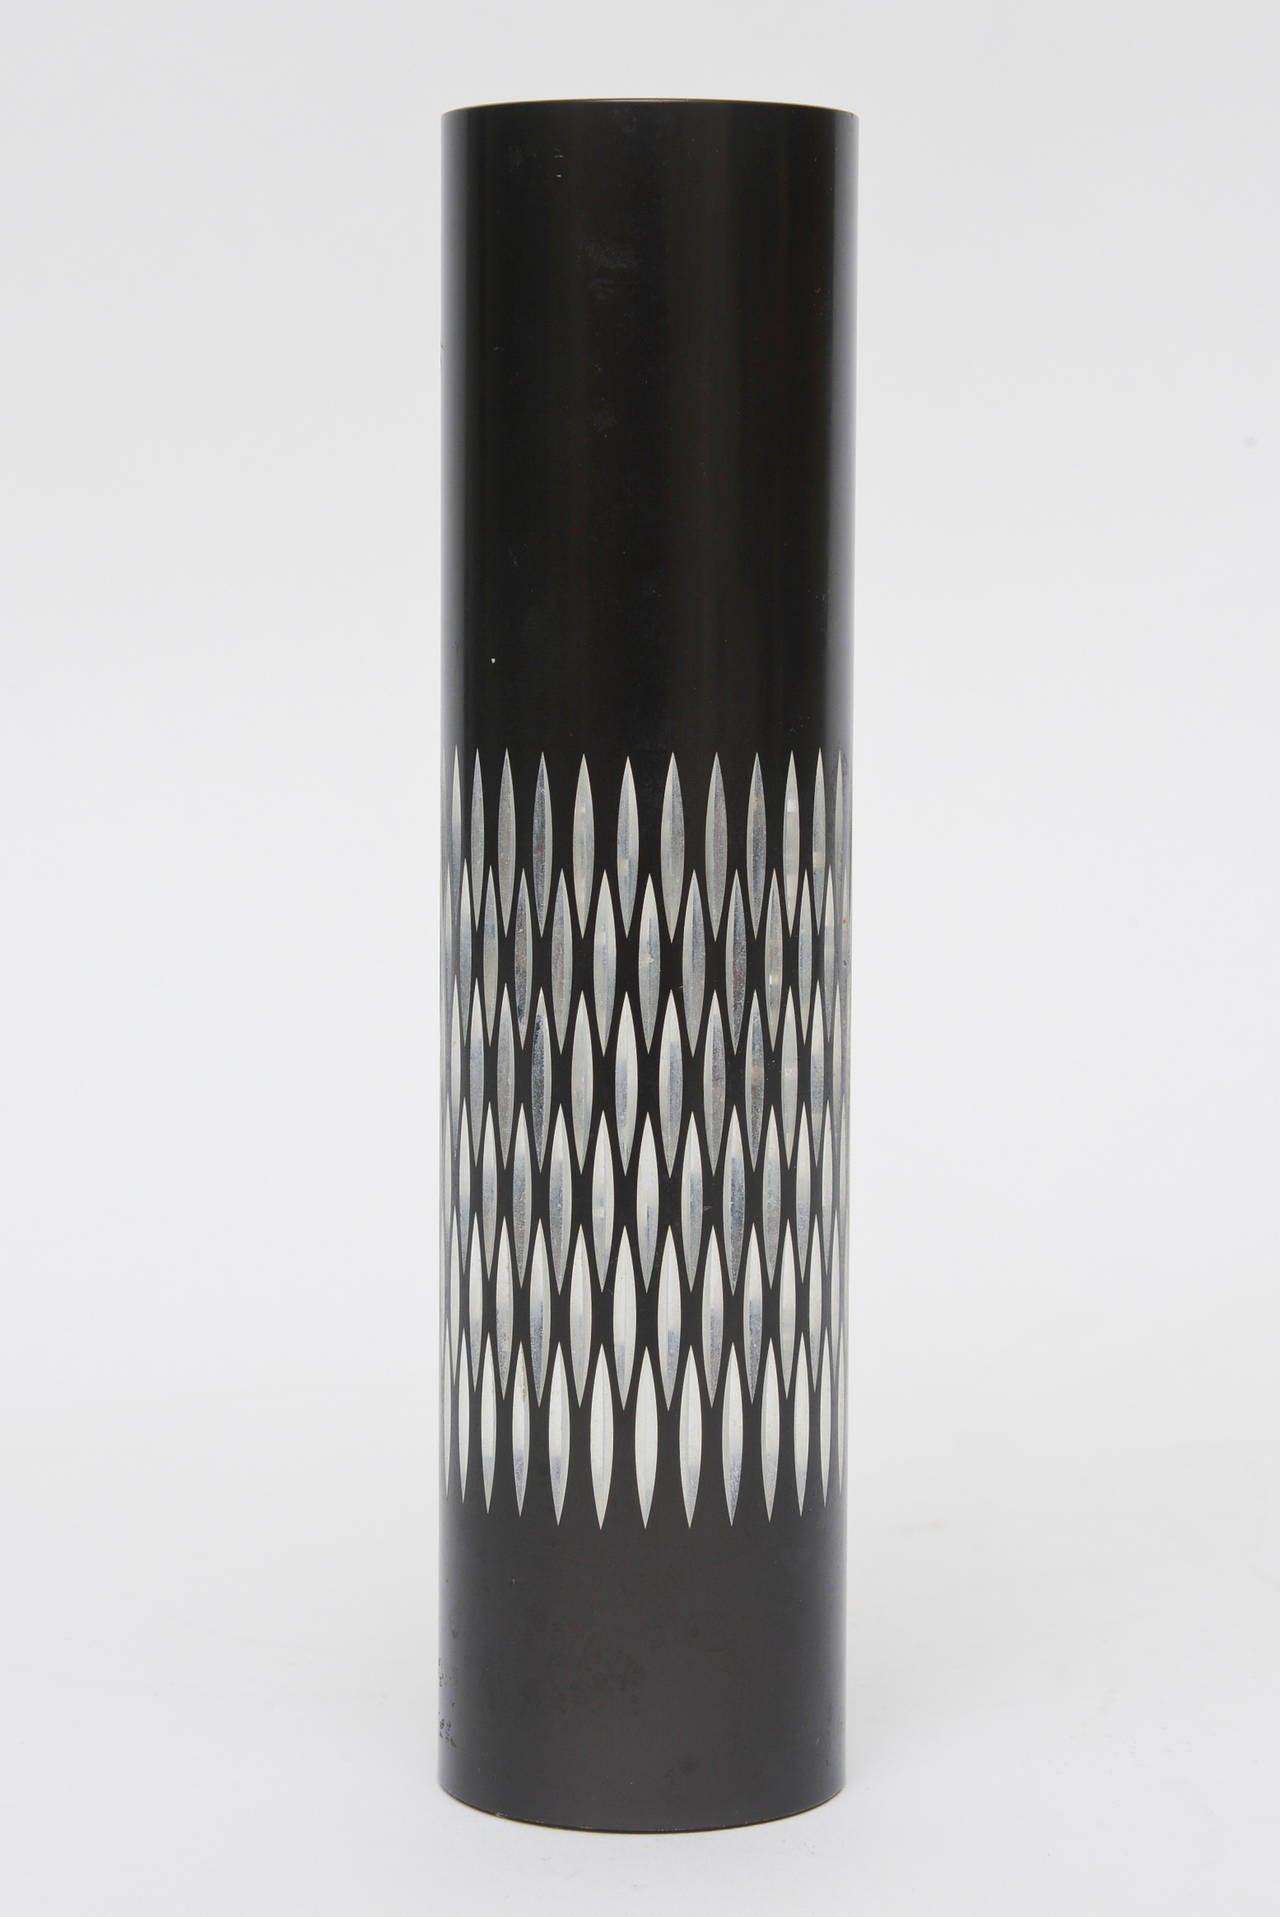 This wonderful English vintage graphic cylinder and or vase period black metal vase with textured diamond patterned indented silver is unusual. It could be used for makeup brushes, a desk accessory, a small cylinder vase or a chic pencil and pen